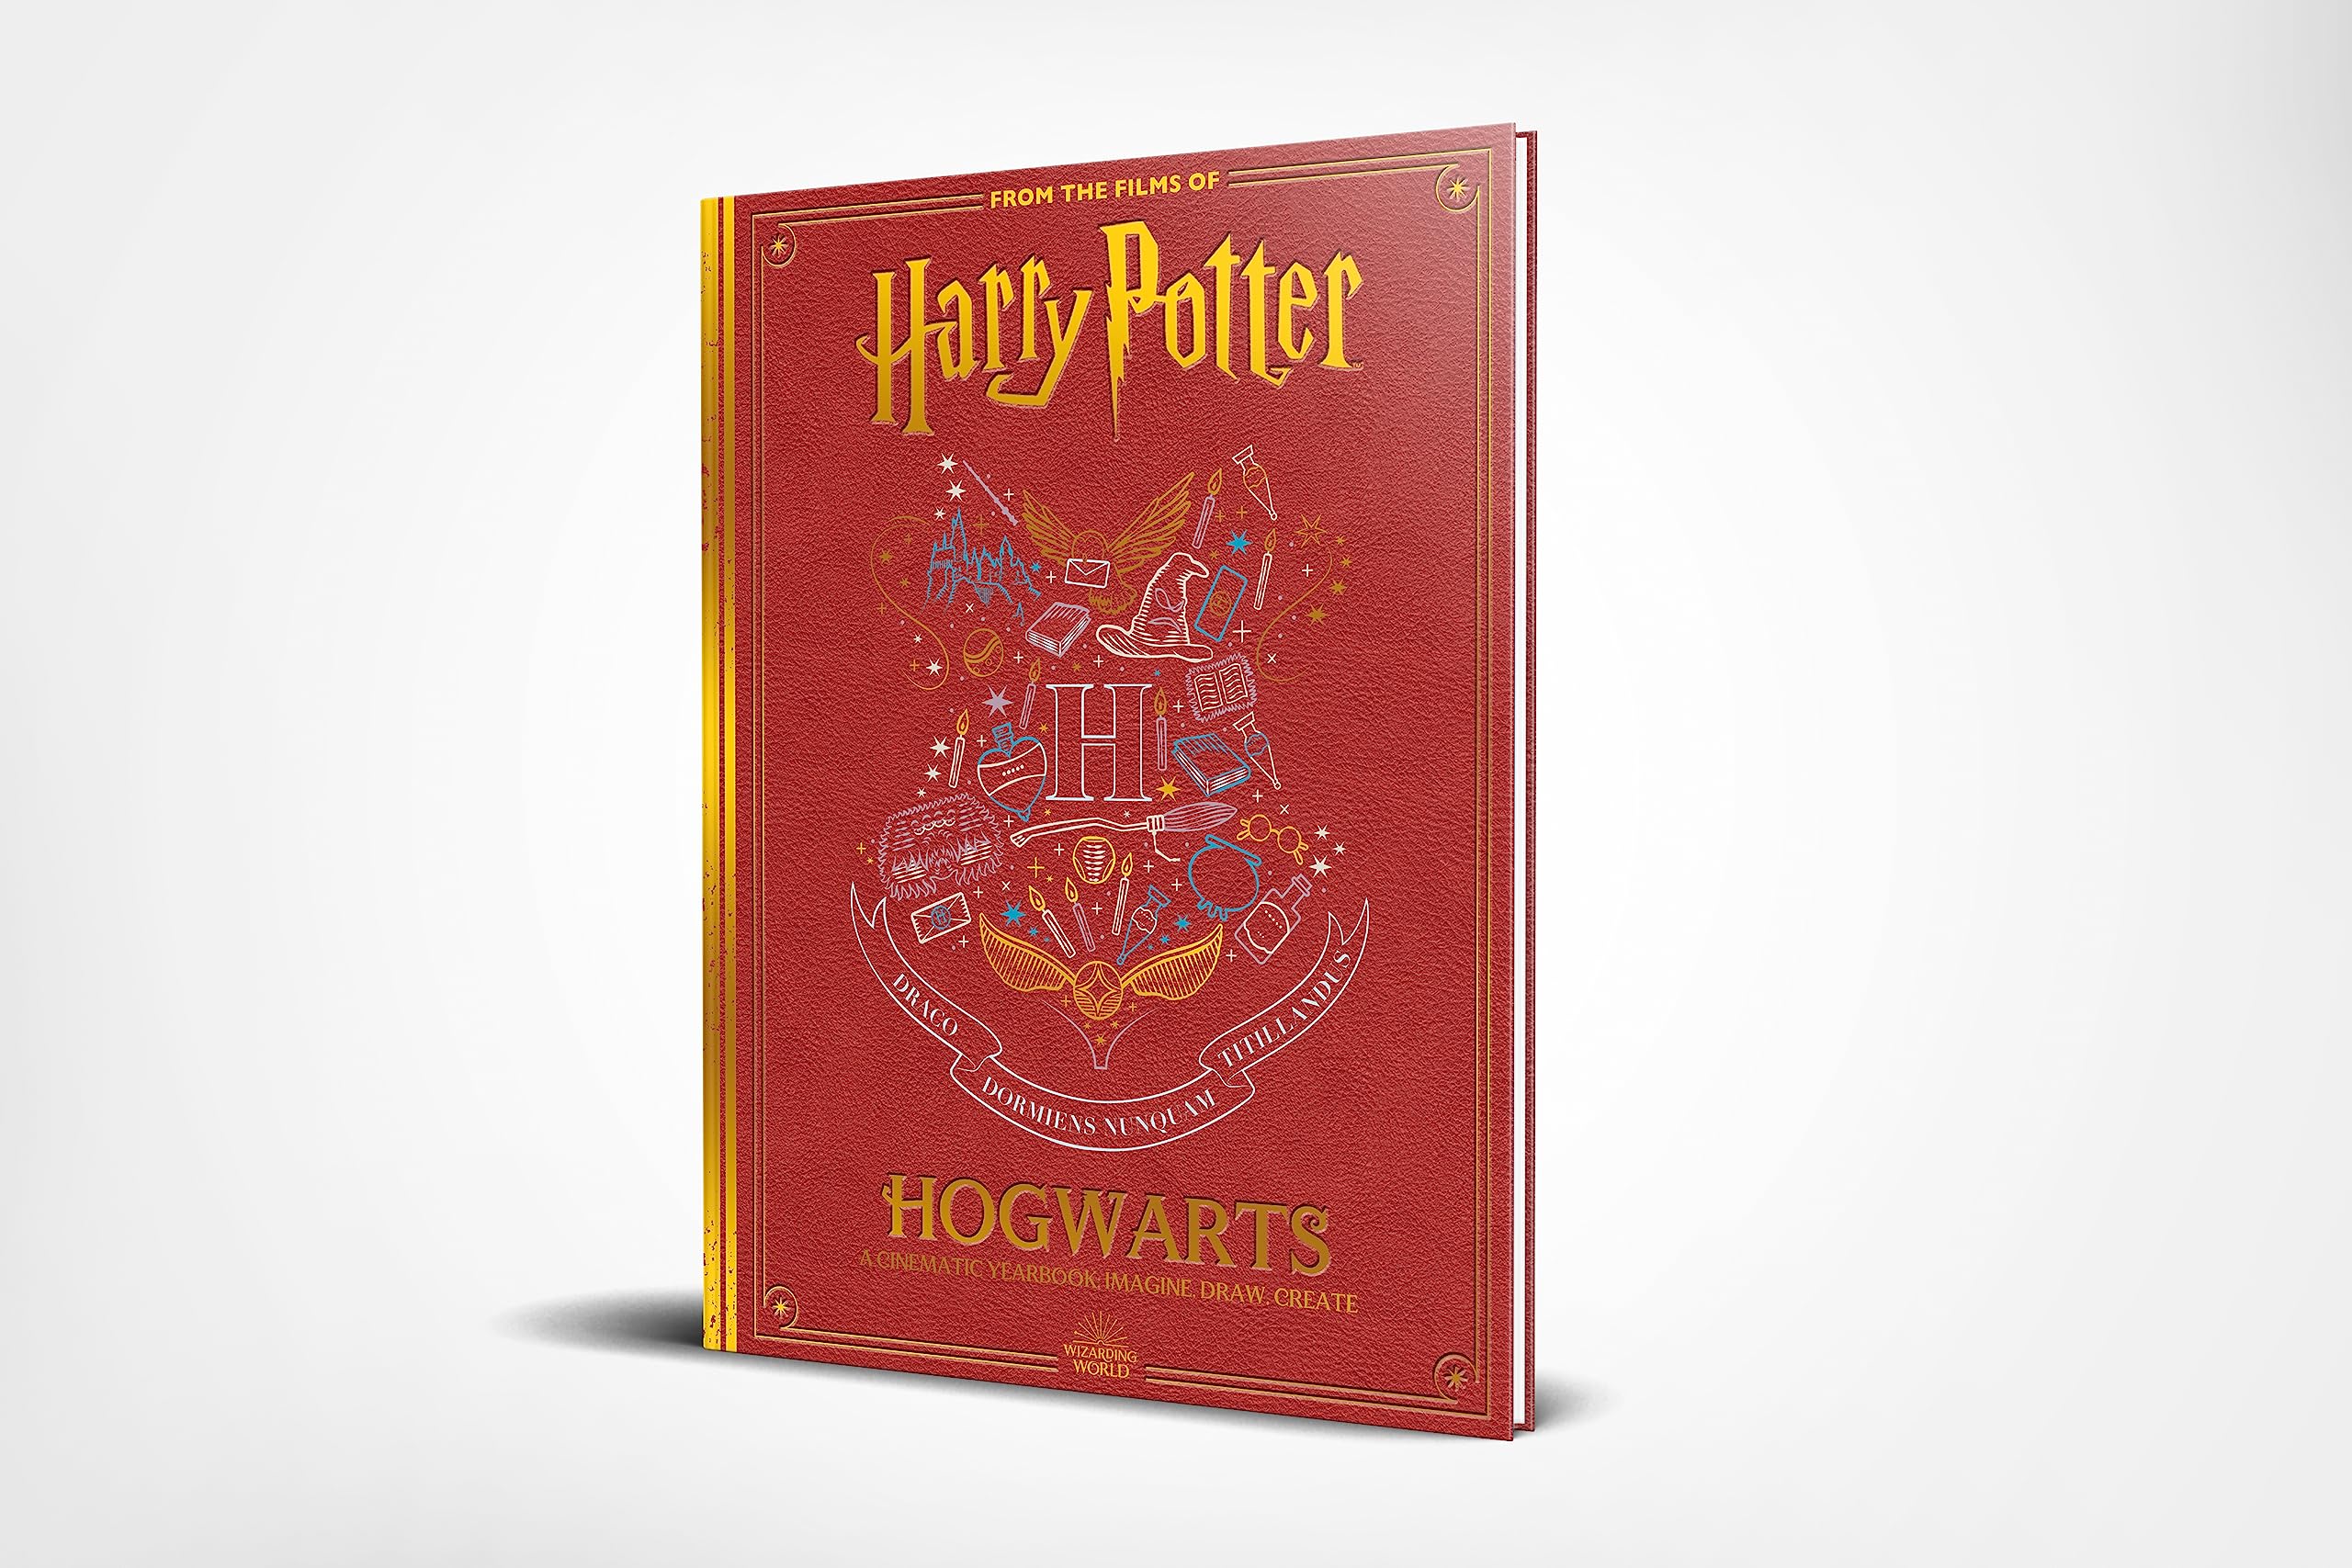 Hogwarts: A Cinematic Yearbook 20th Anniversary Edition (Harry Potter)